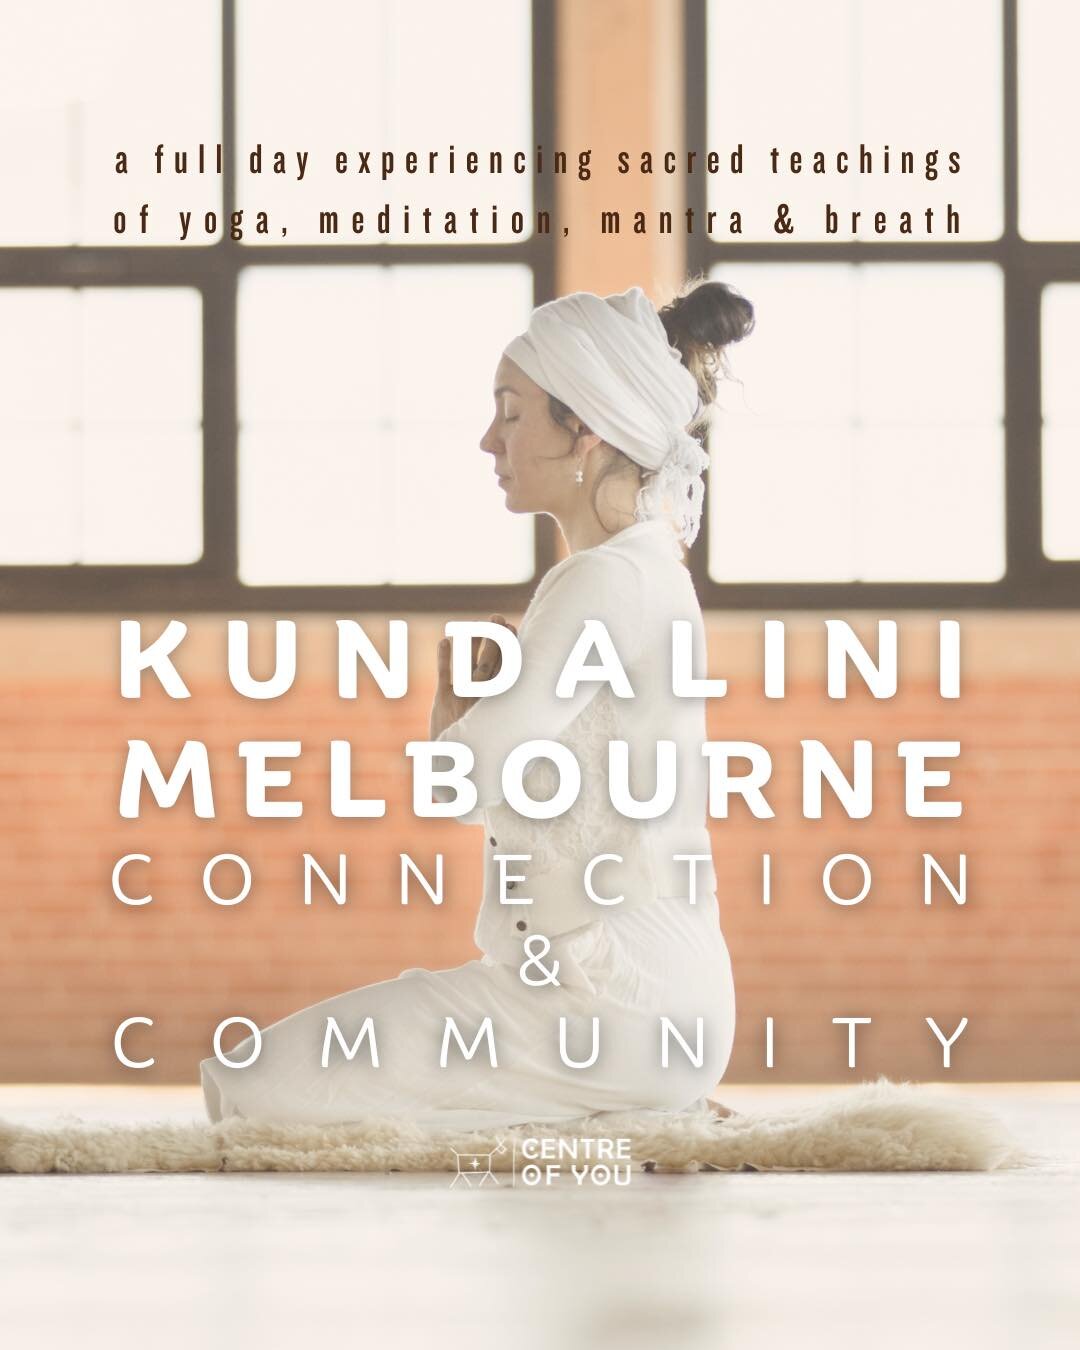 Join me and many other wonderful teachers next Monday 11 March at the Kundalini Yoga Melbourne Festival!!

A full day experiencing these sacred teachings of yoga, meditation, mantra and breathing, and community. 

✨ Practice with teachers from across